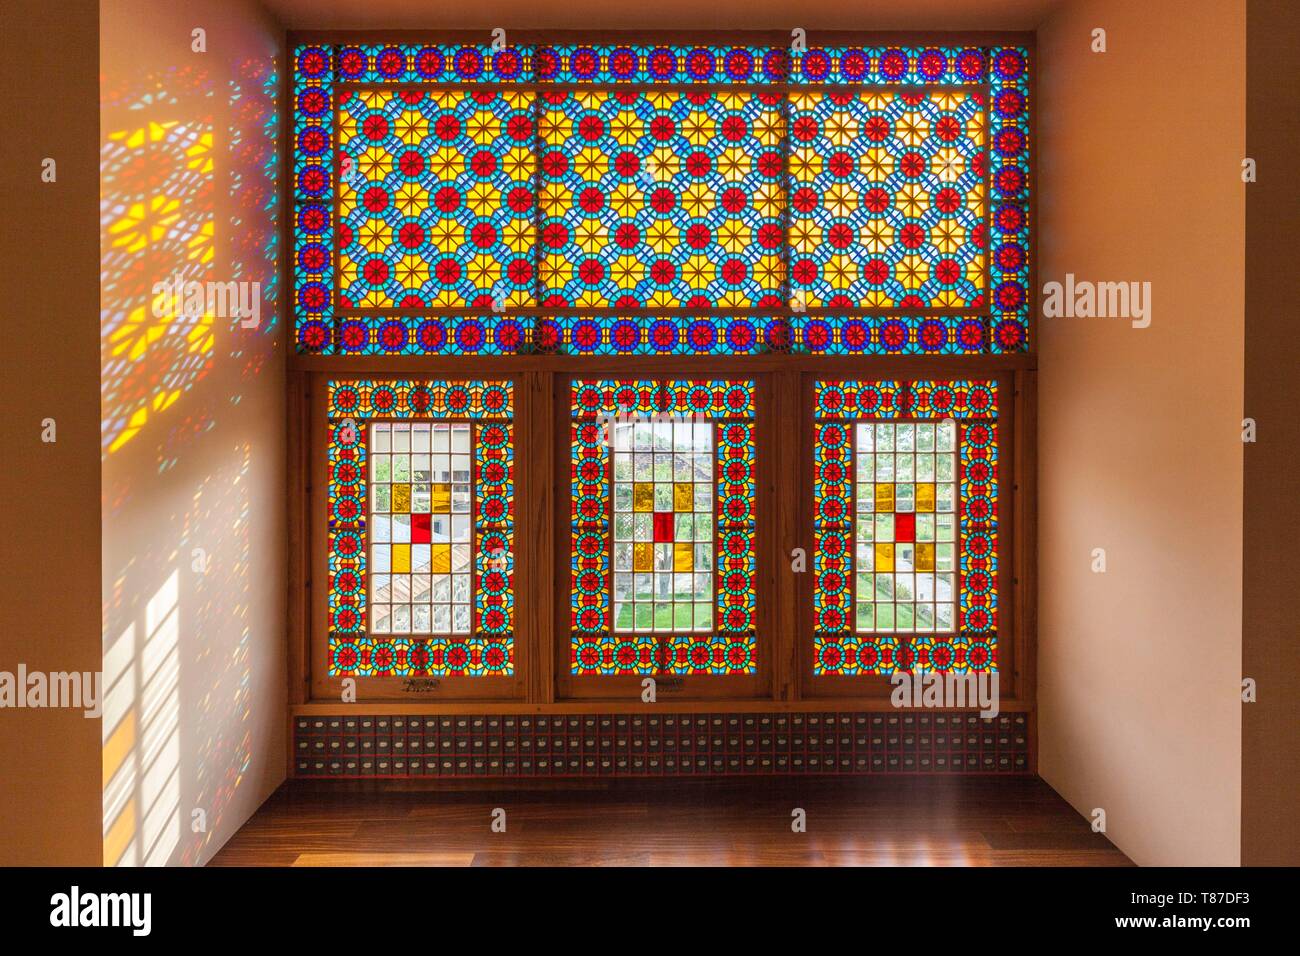 Image result for traditional artistic windows of Azerbaijan made solely out of wood and tinted glass